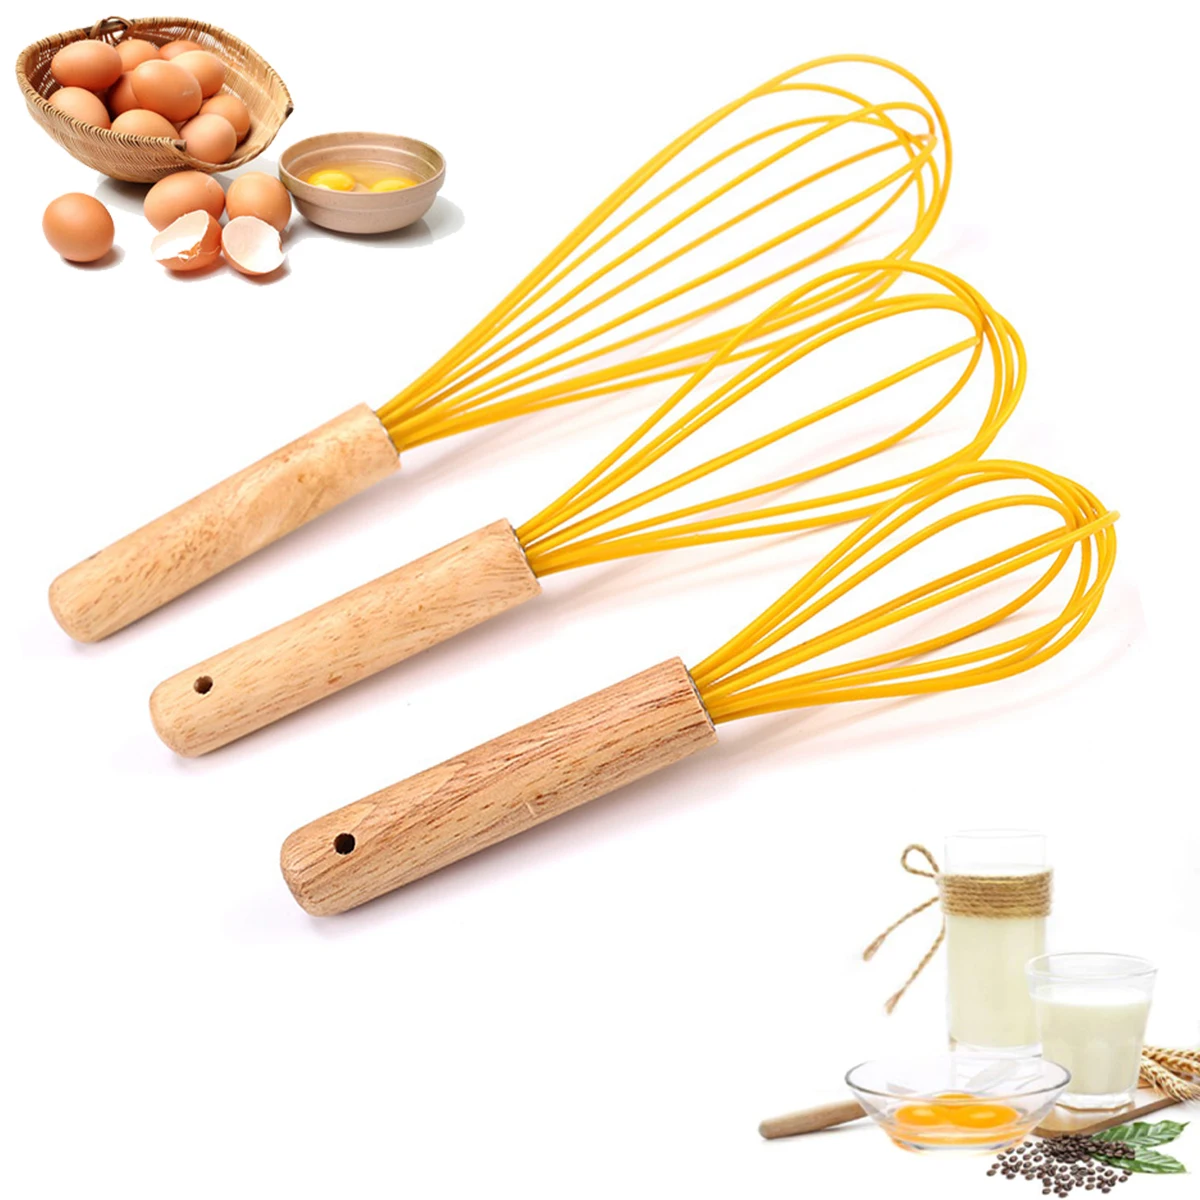 

Manual Egg Beater Wooden Handle Silicone Mixer Egg Beaters Whisk Kitchen Gadgets Egg Cream Stirring Kitchen Baking Pastry Tools, Blue, orange, black